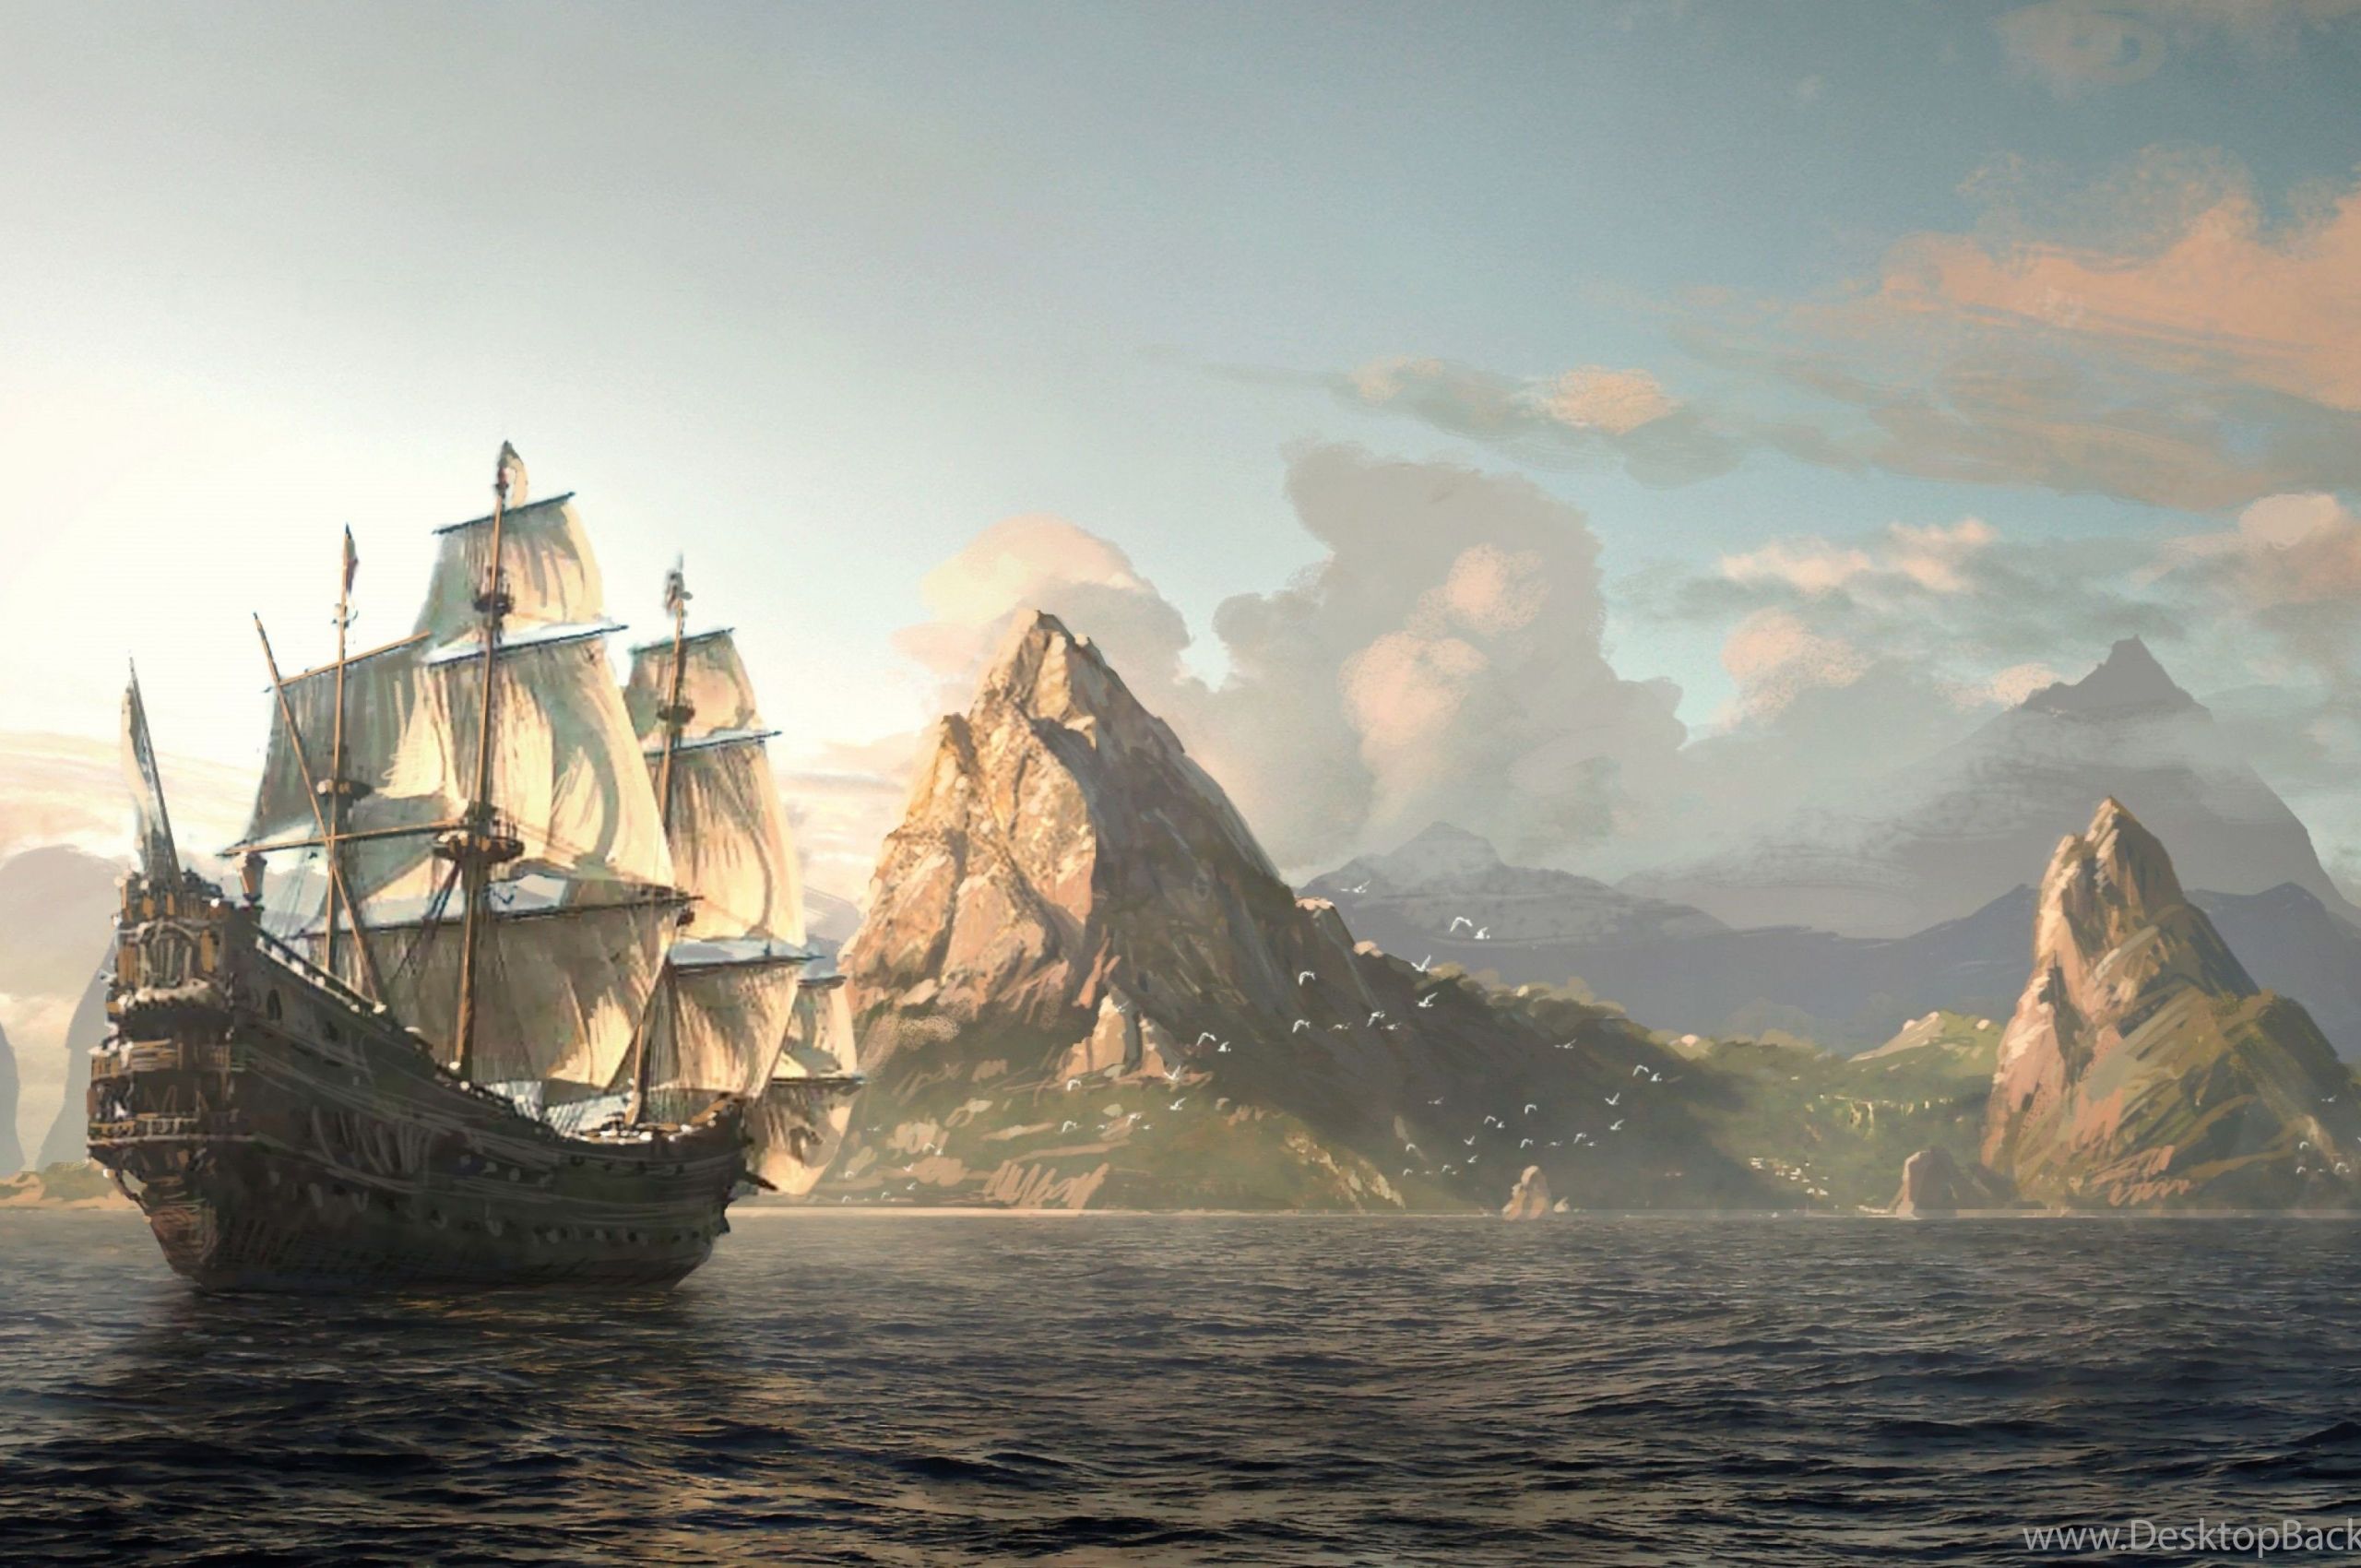 Free download 4K Pirate WallpaperK Pirate Background [3840x2160] for your Desktop, Mobile & Tablet. Explore Pirates Background. Pirates Wallpaper, Pirates Wallpaper, Pirates Background